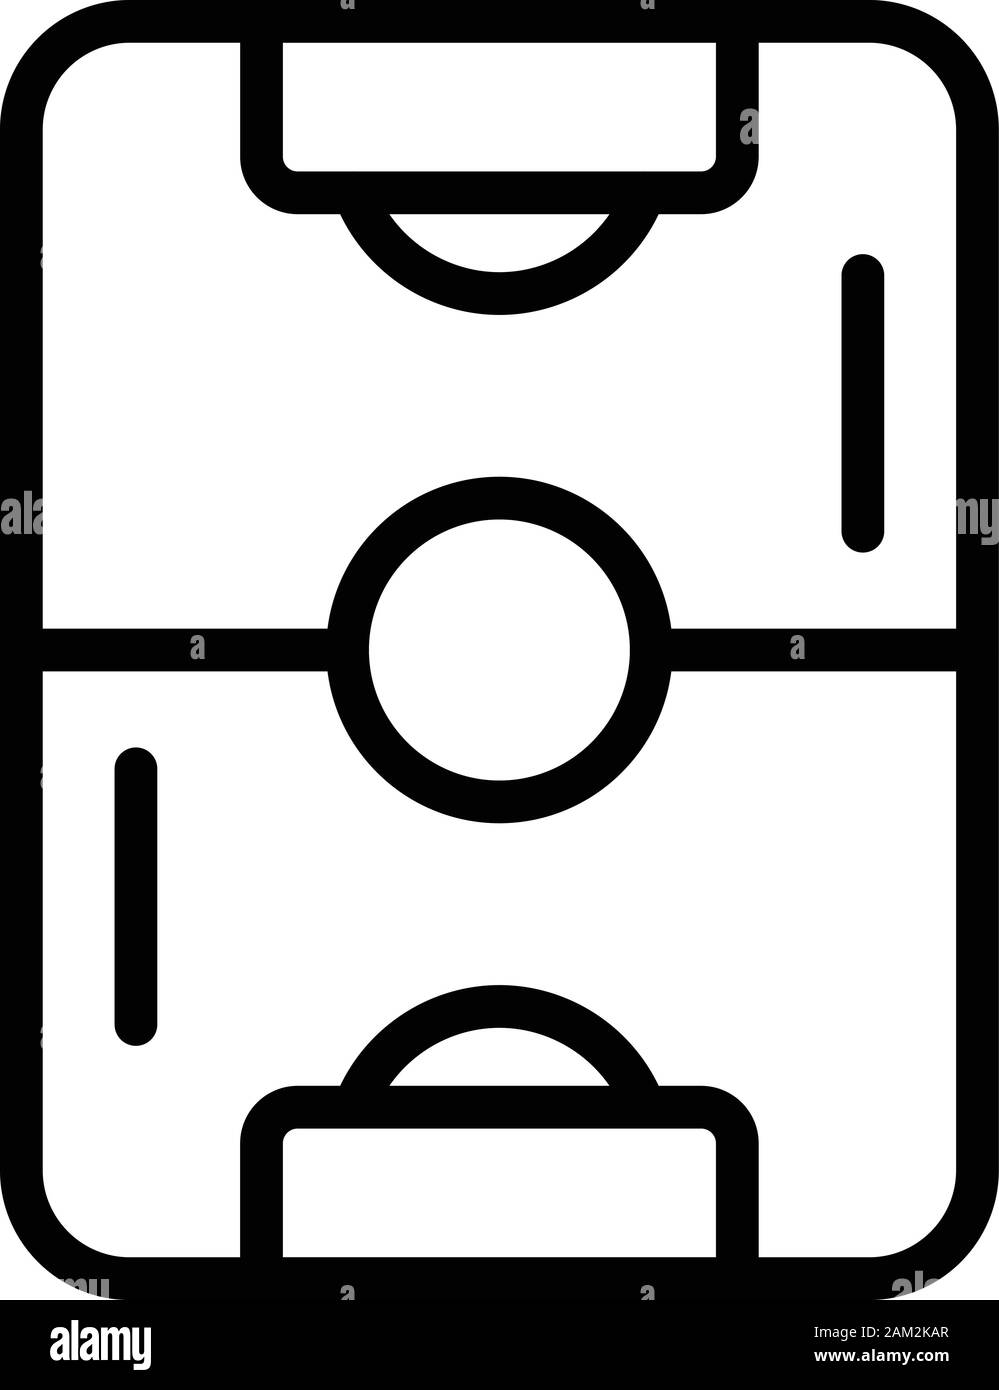 Soccer field icon, outline style Stock Vector